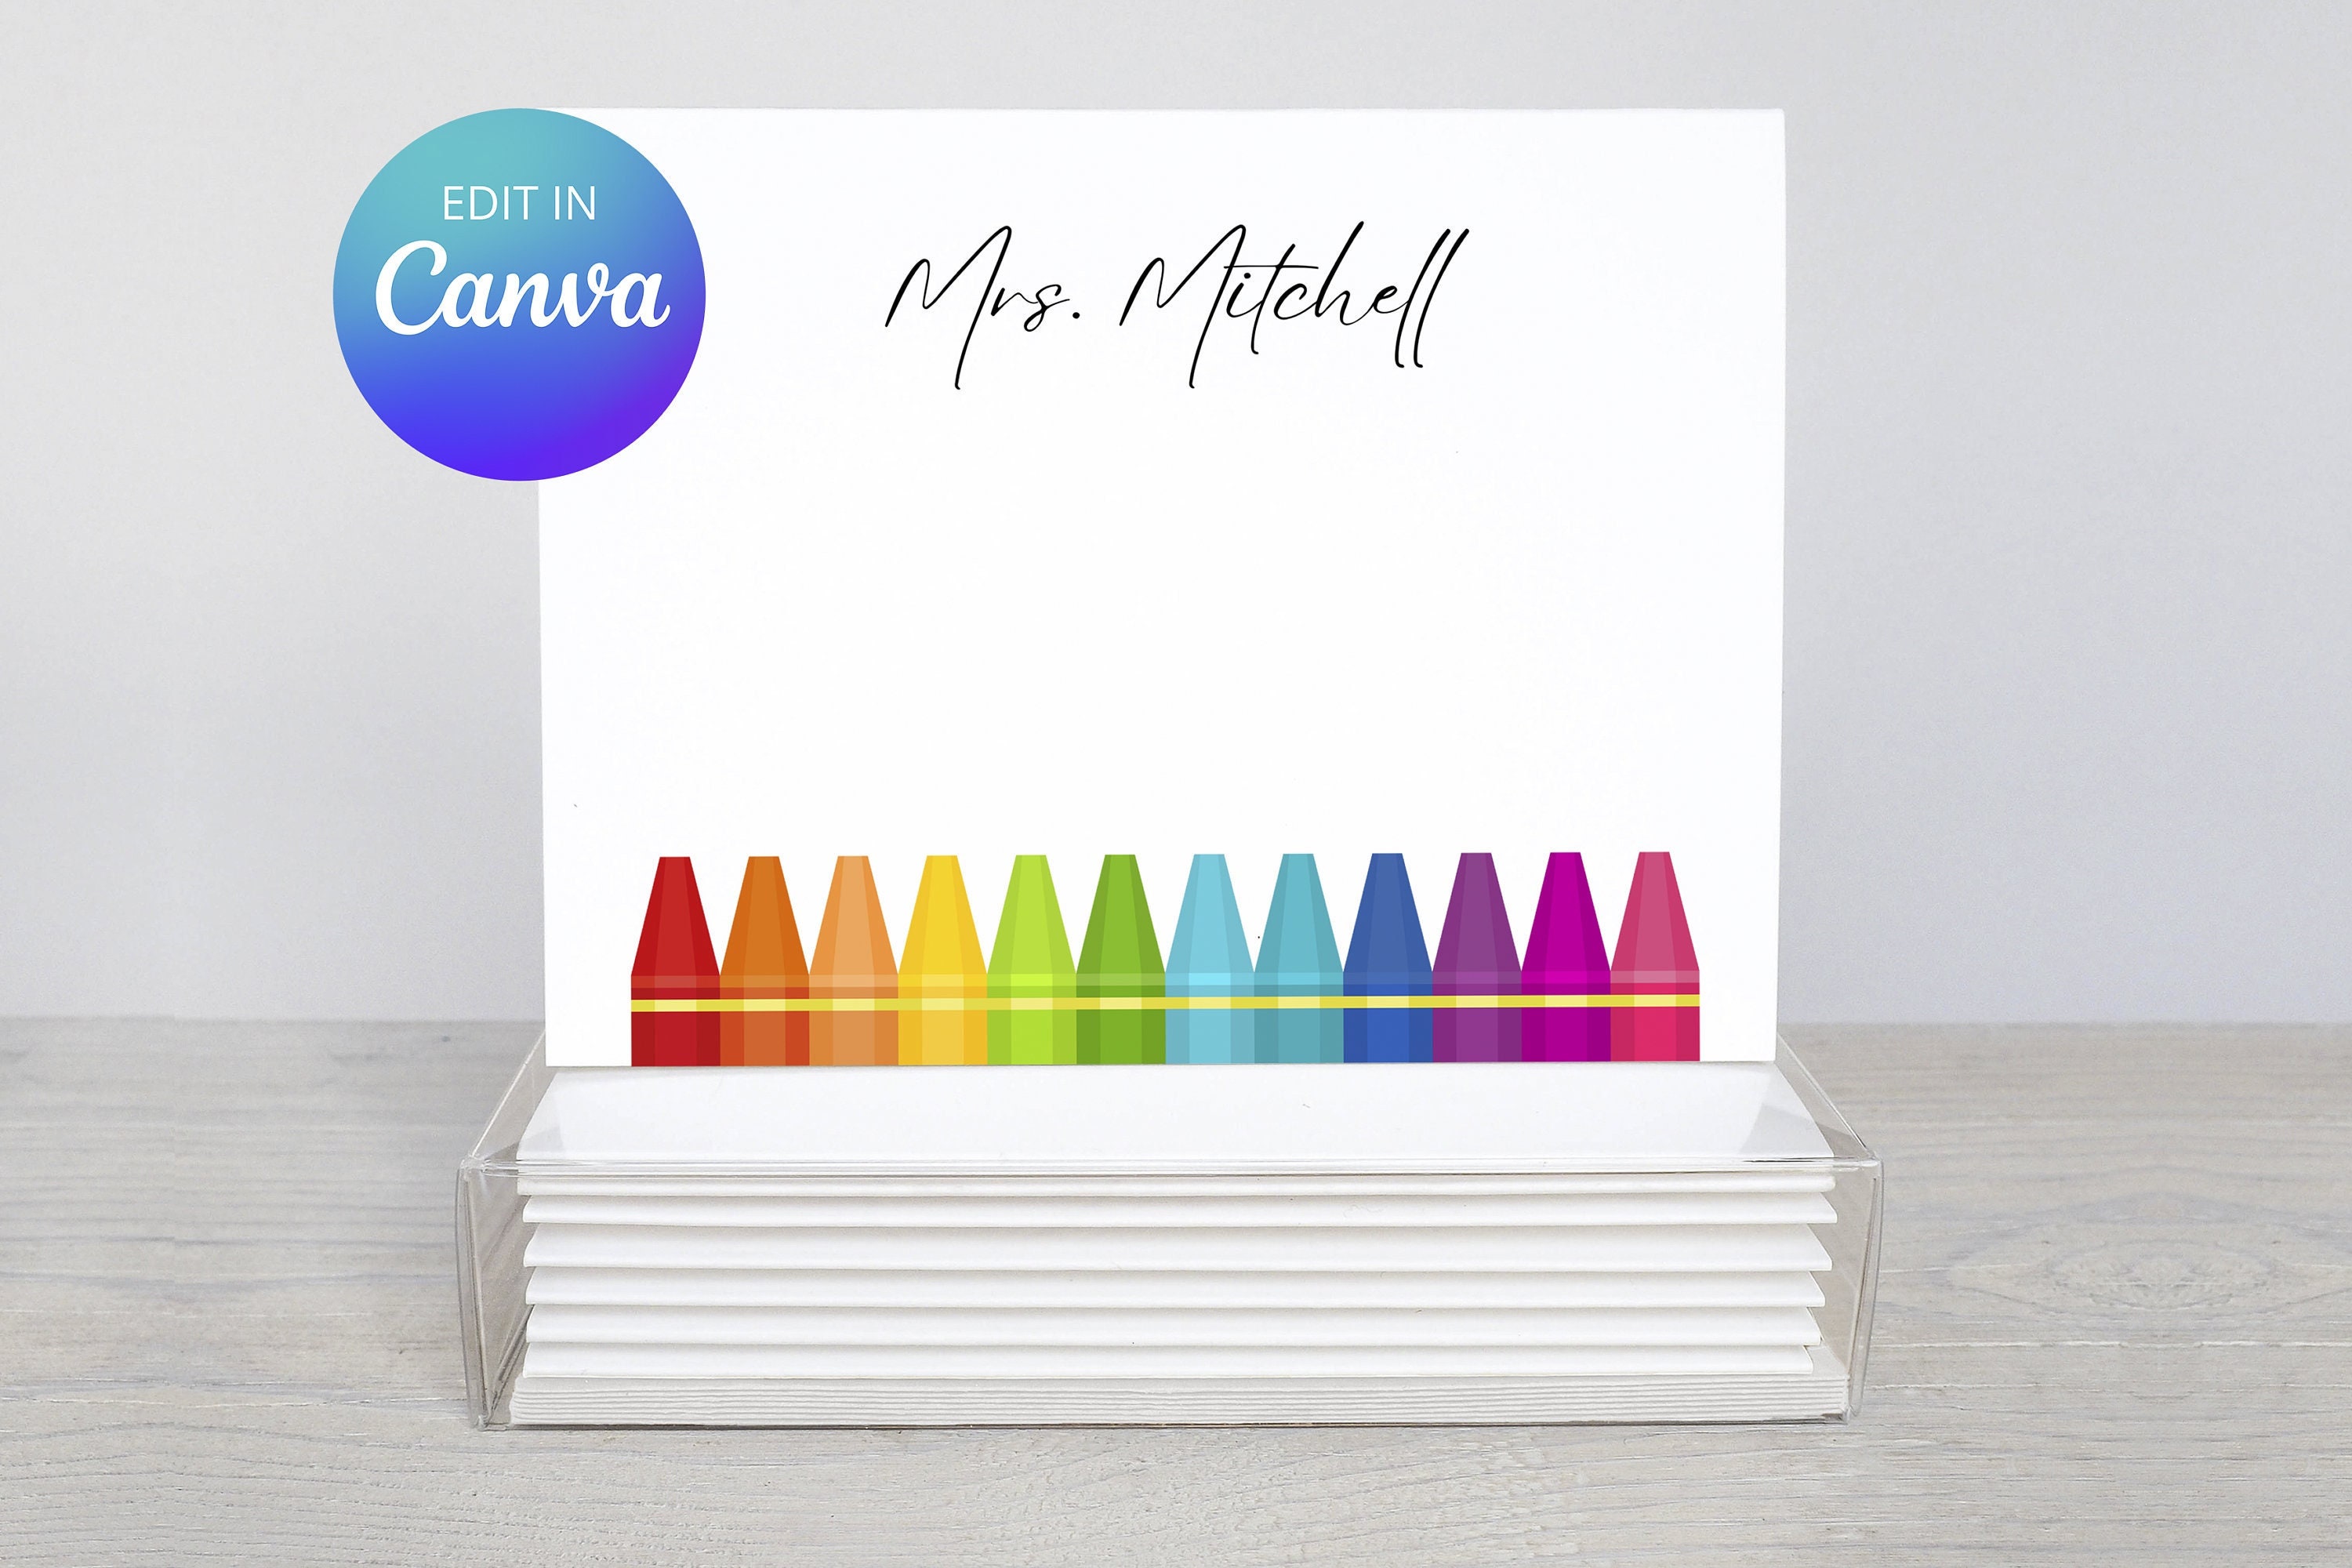 Personalized Teacher Gifts Flat Notes Notecards Stationery With Envelopes  Design Your Own Choose ONE DESIGN 